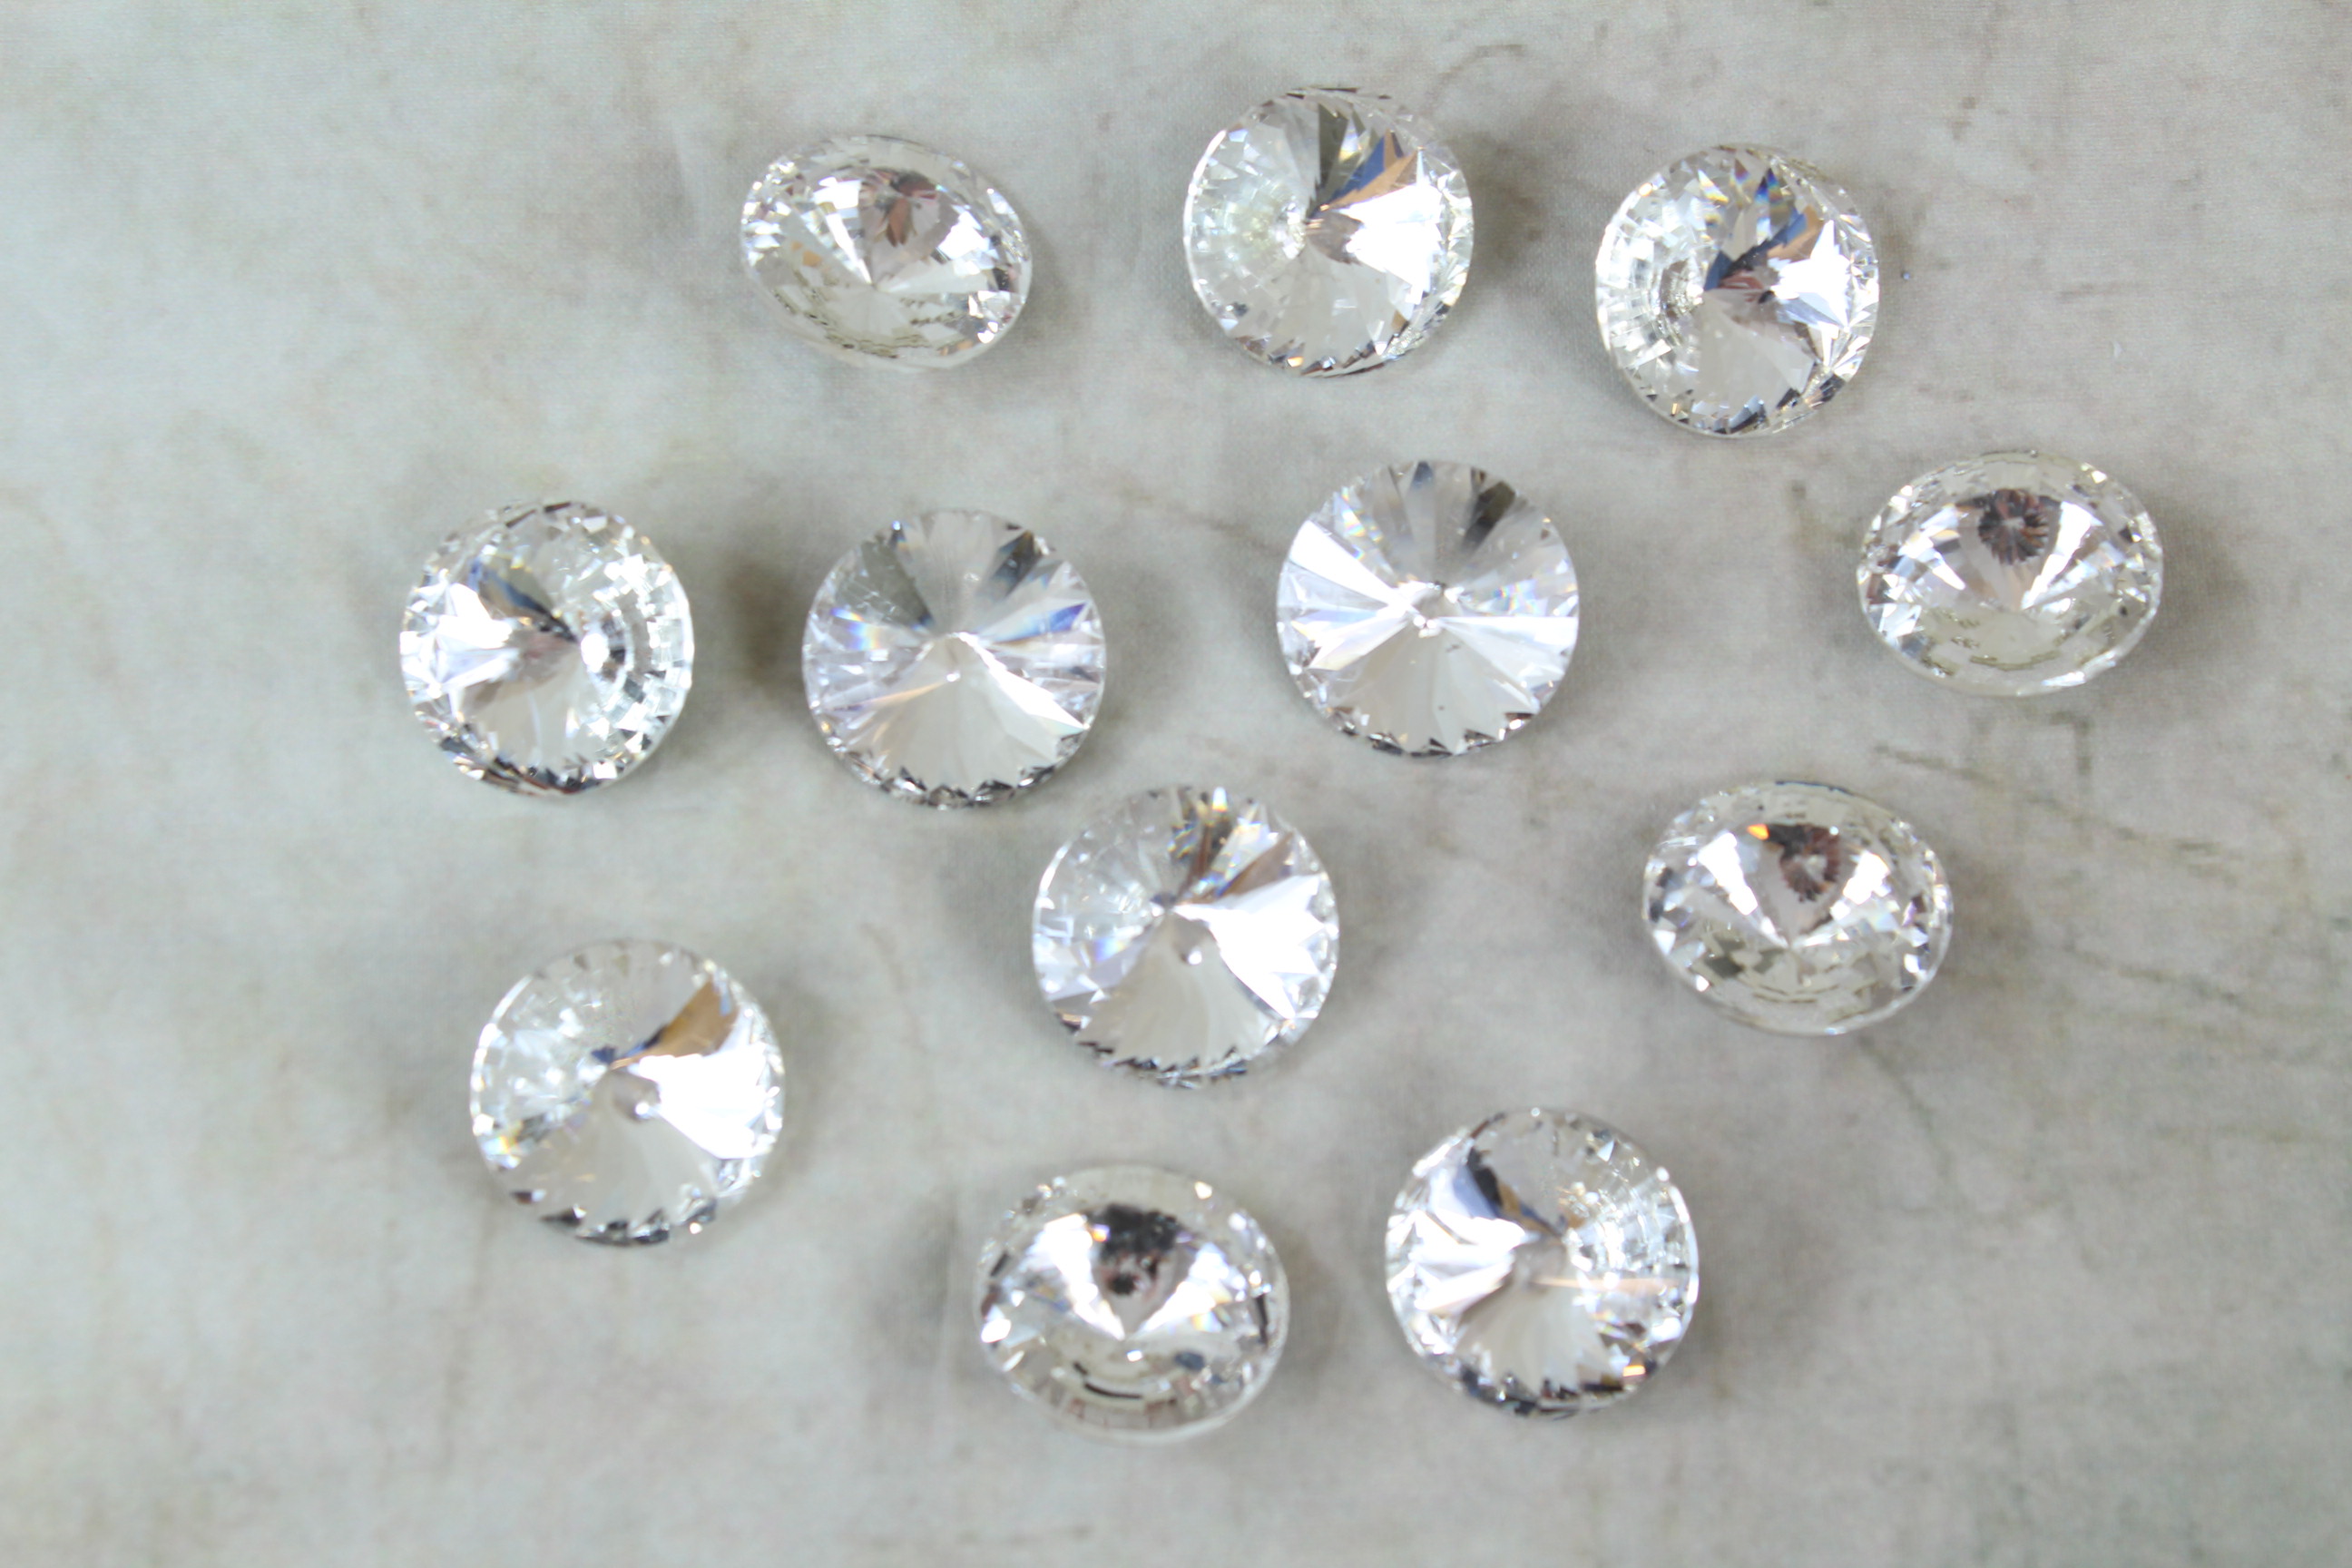 48 x 27mm Large Round Table Gems